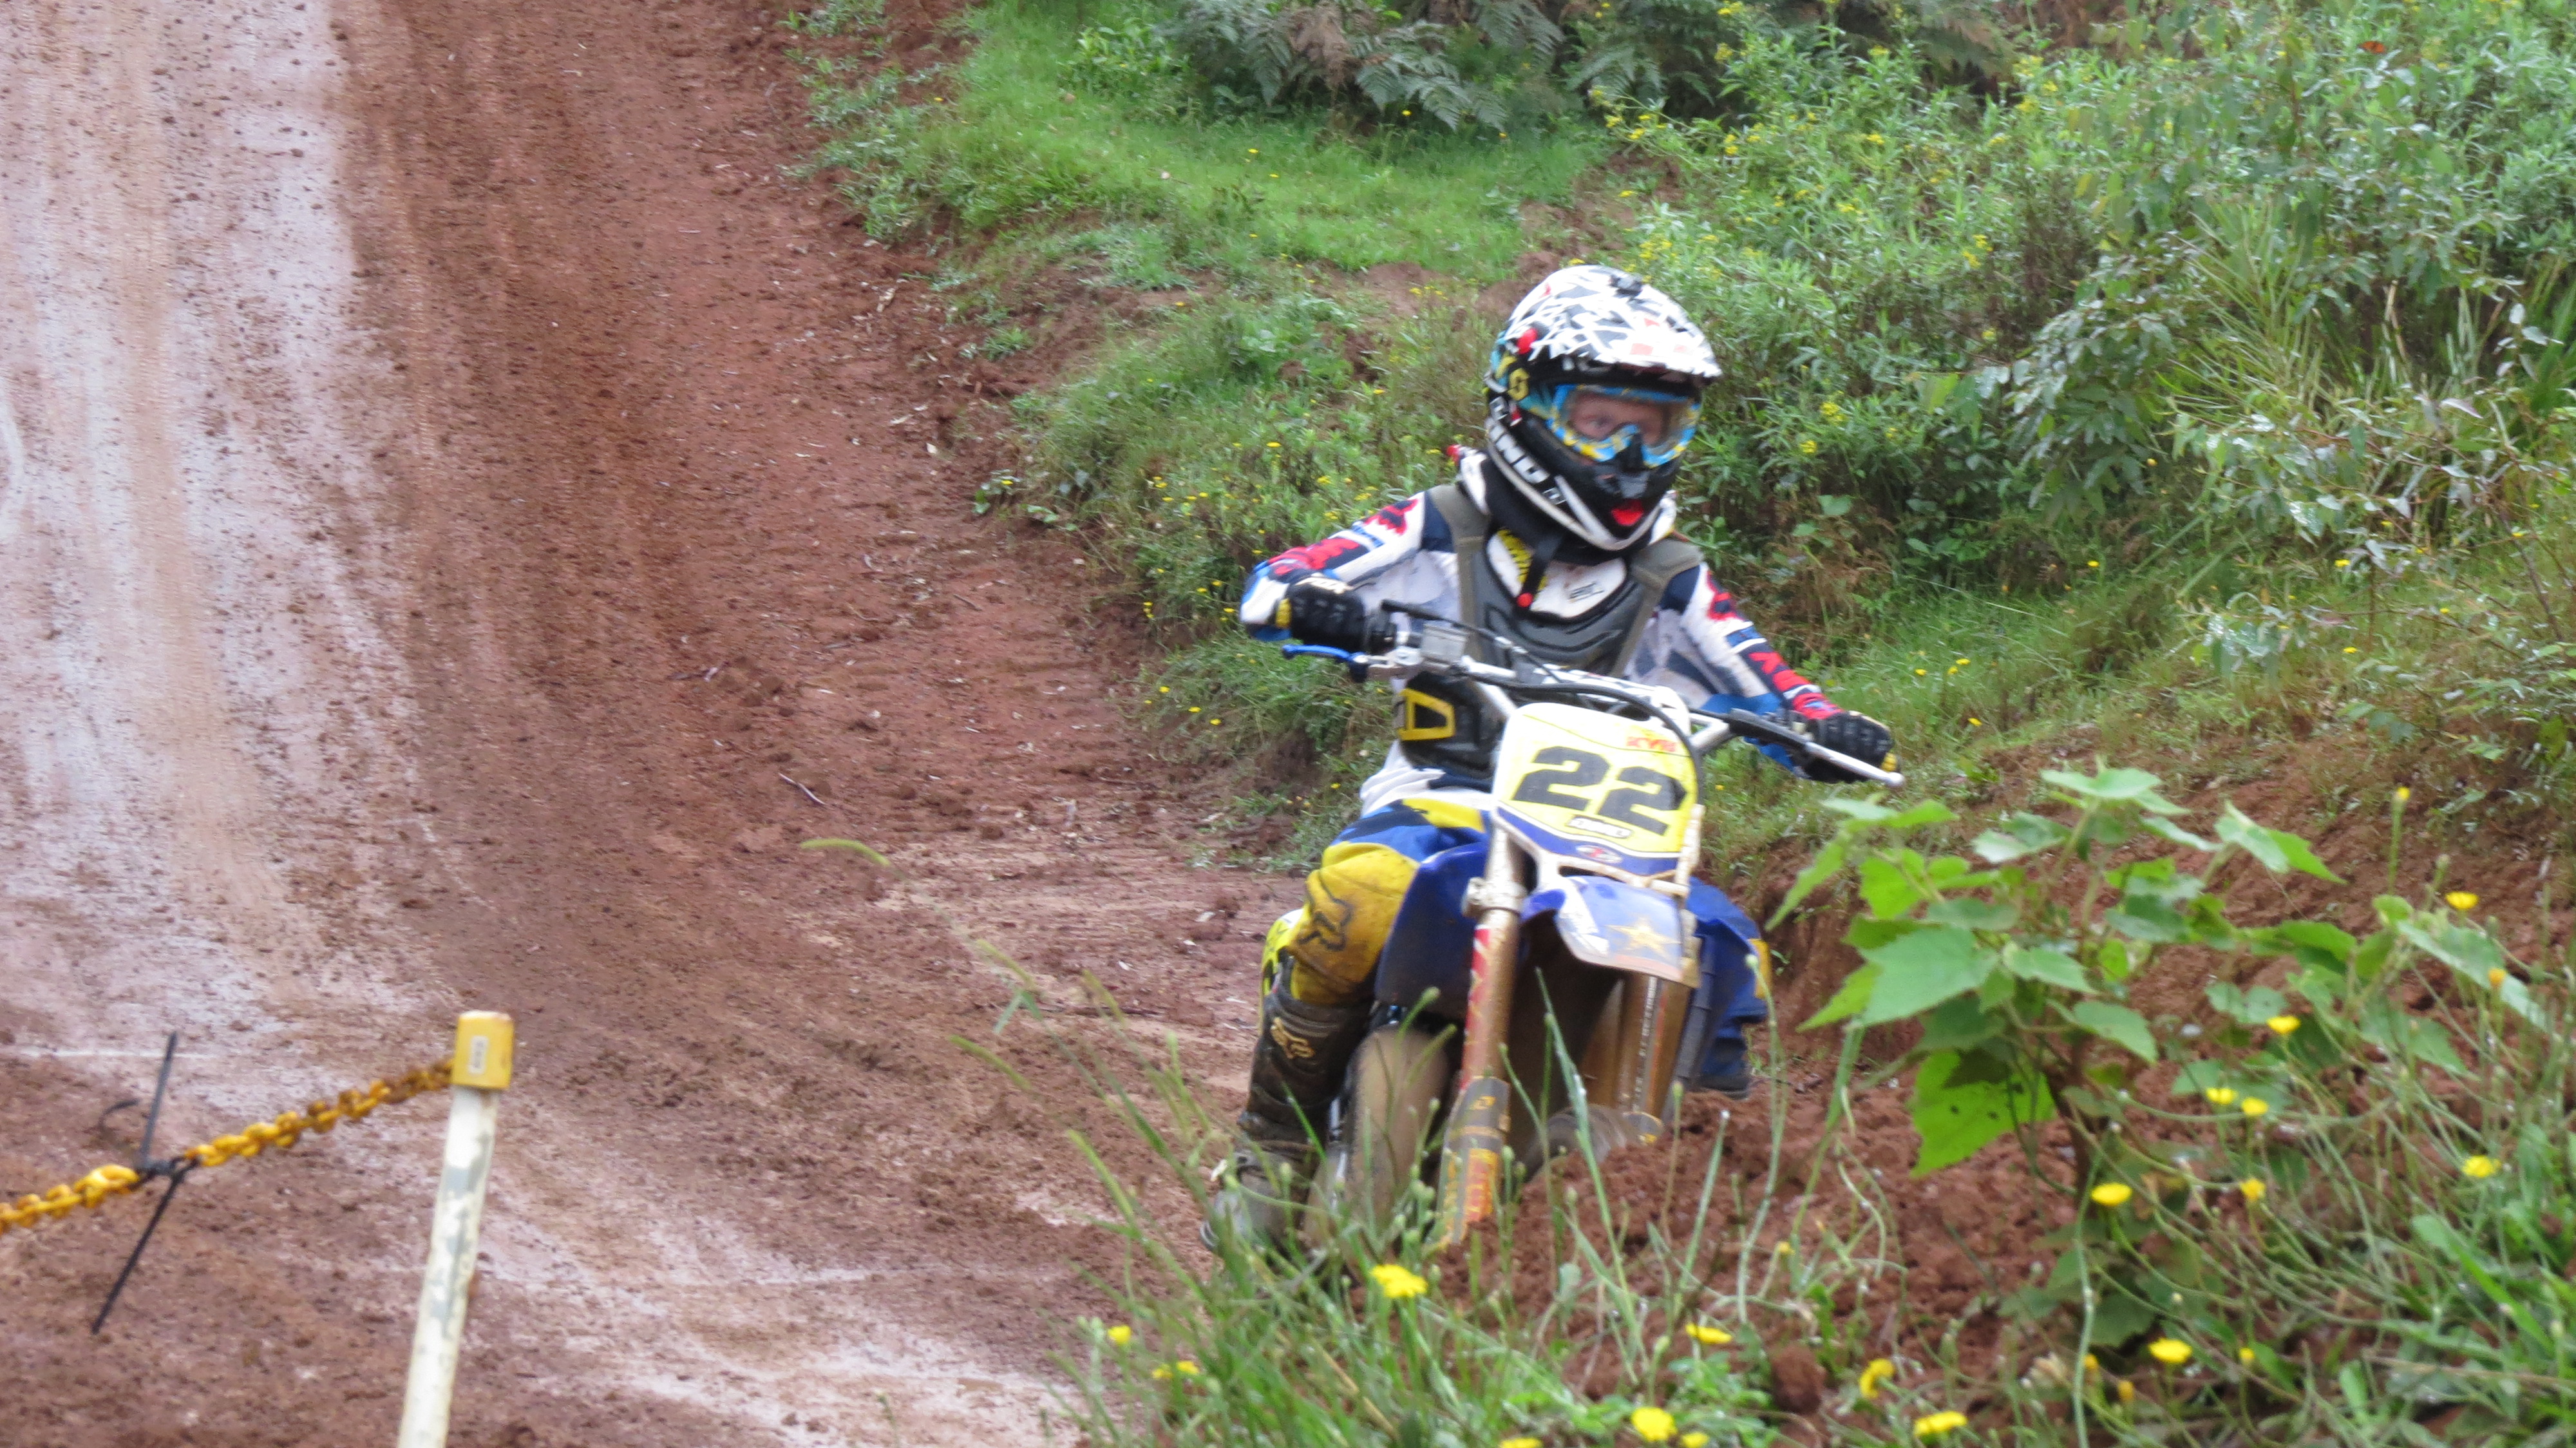 Dirt bike riders should be looking at local legal trails